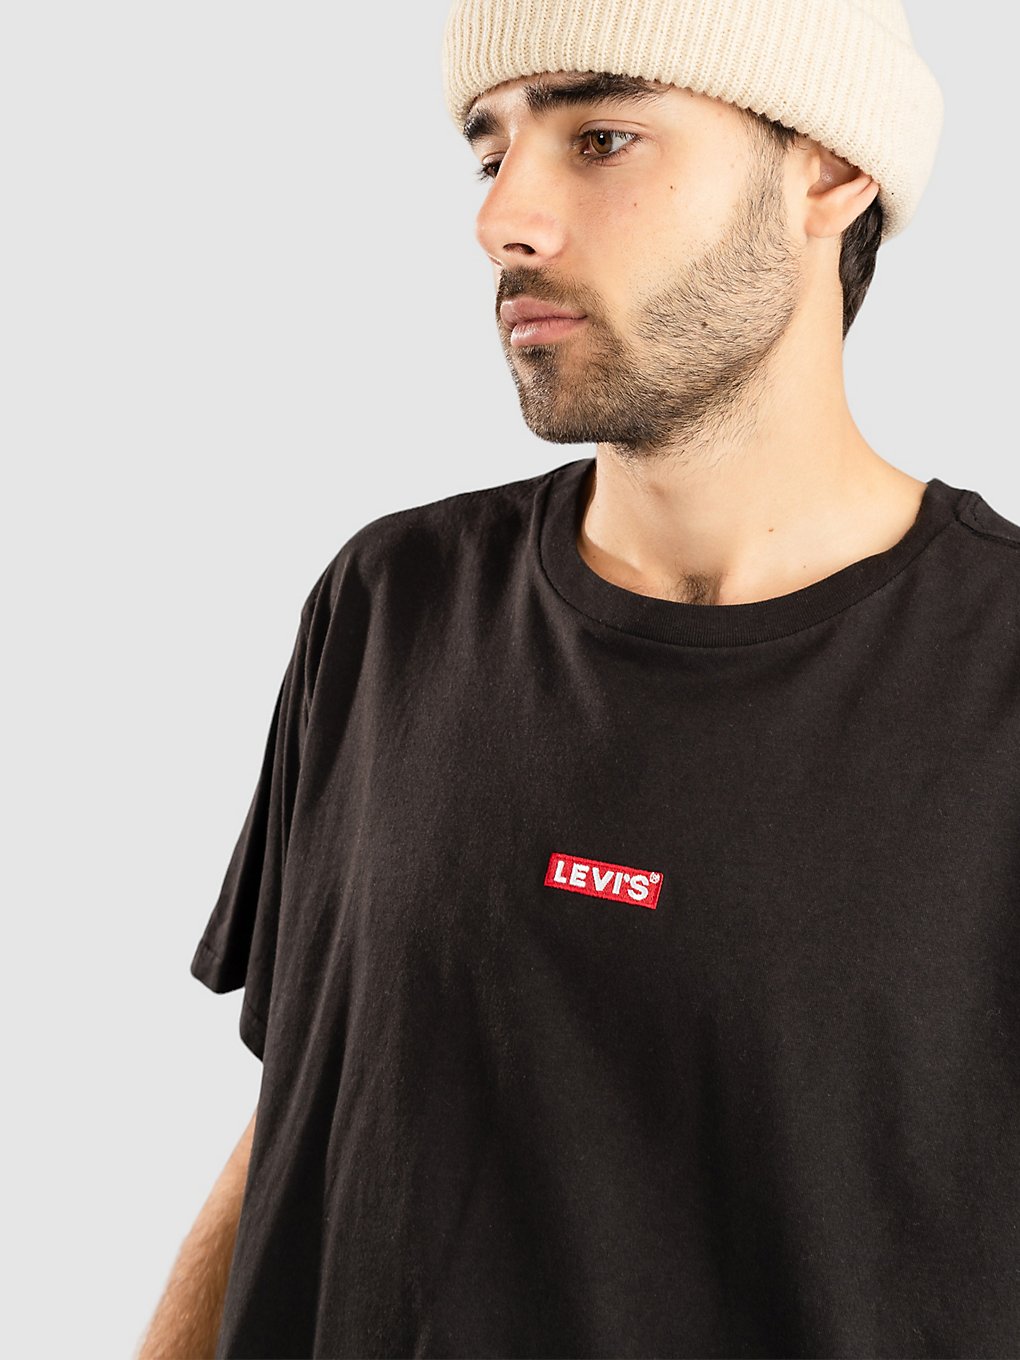 levi's relaxed baby tab t t-shirt meteorite